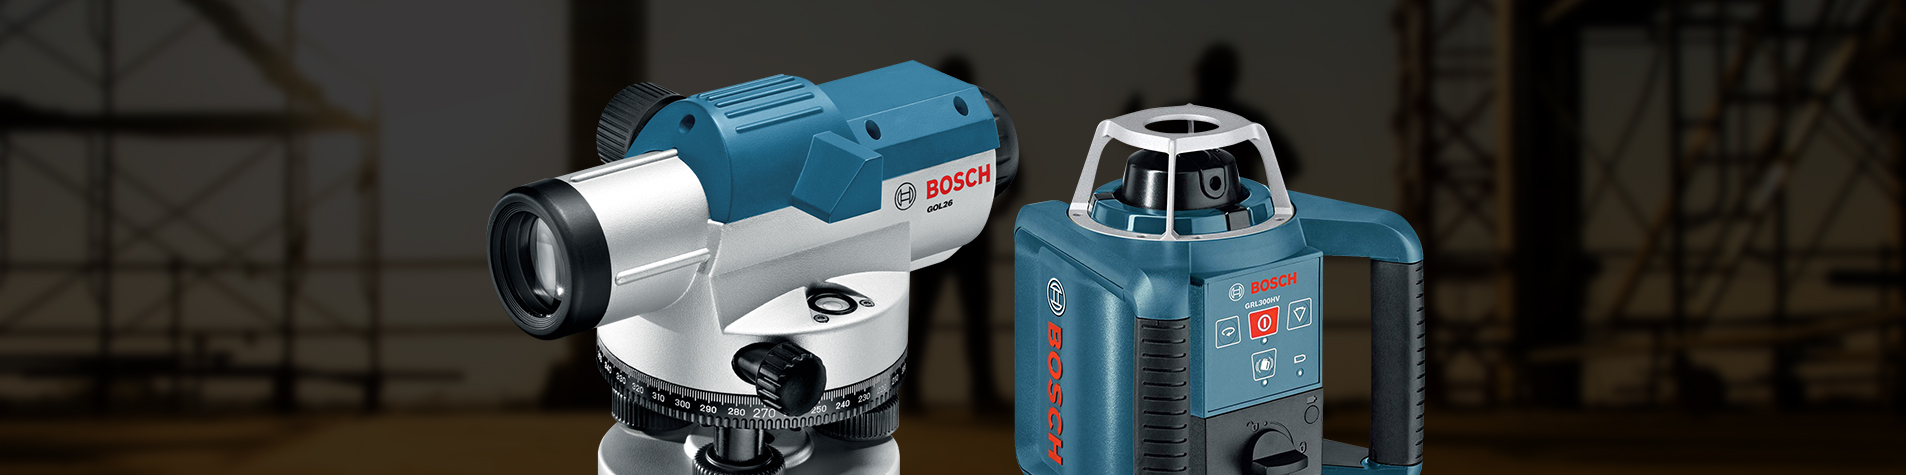 Bosch Tools Laser Levels Bosch Laser Measuring Tools Drills Table Saws Routers Sanders Engineersupply